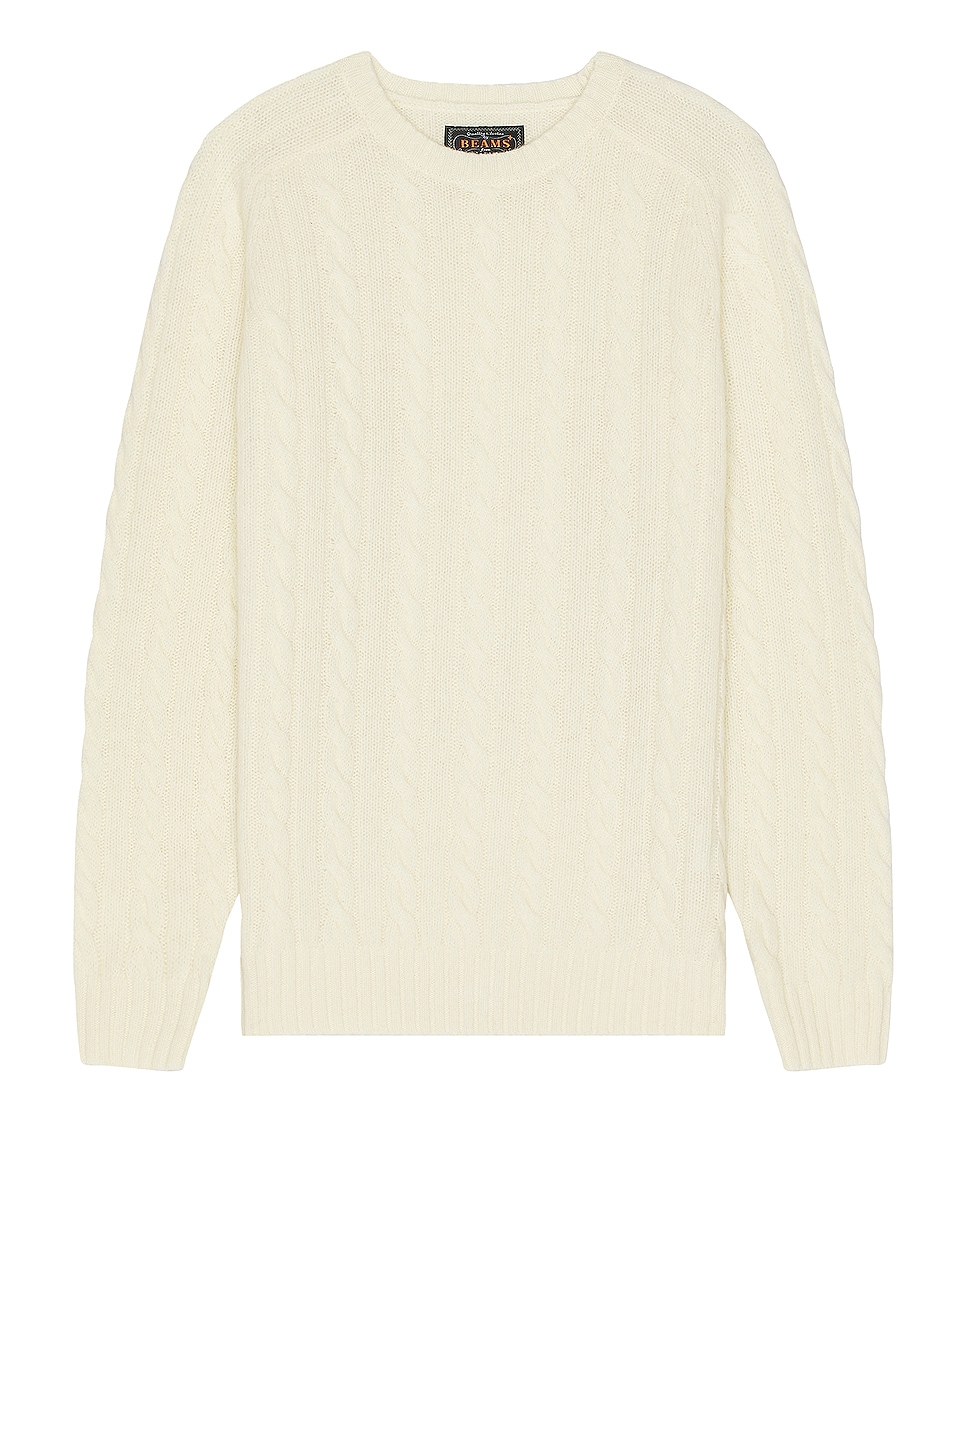 Image 1 of Beams Plus Cable Sweater in Off White